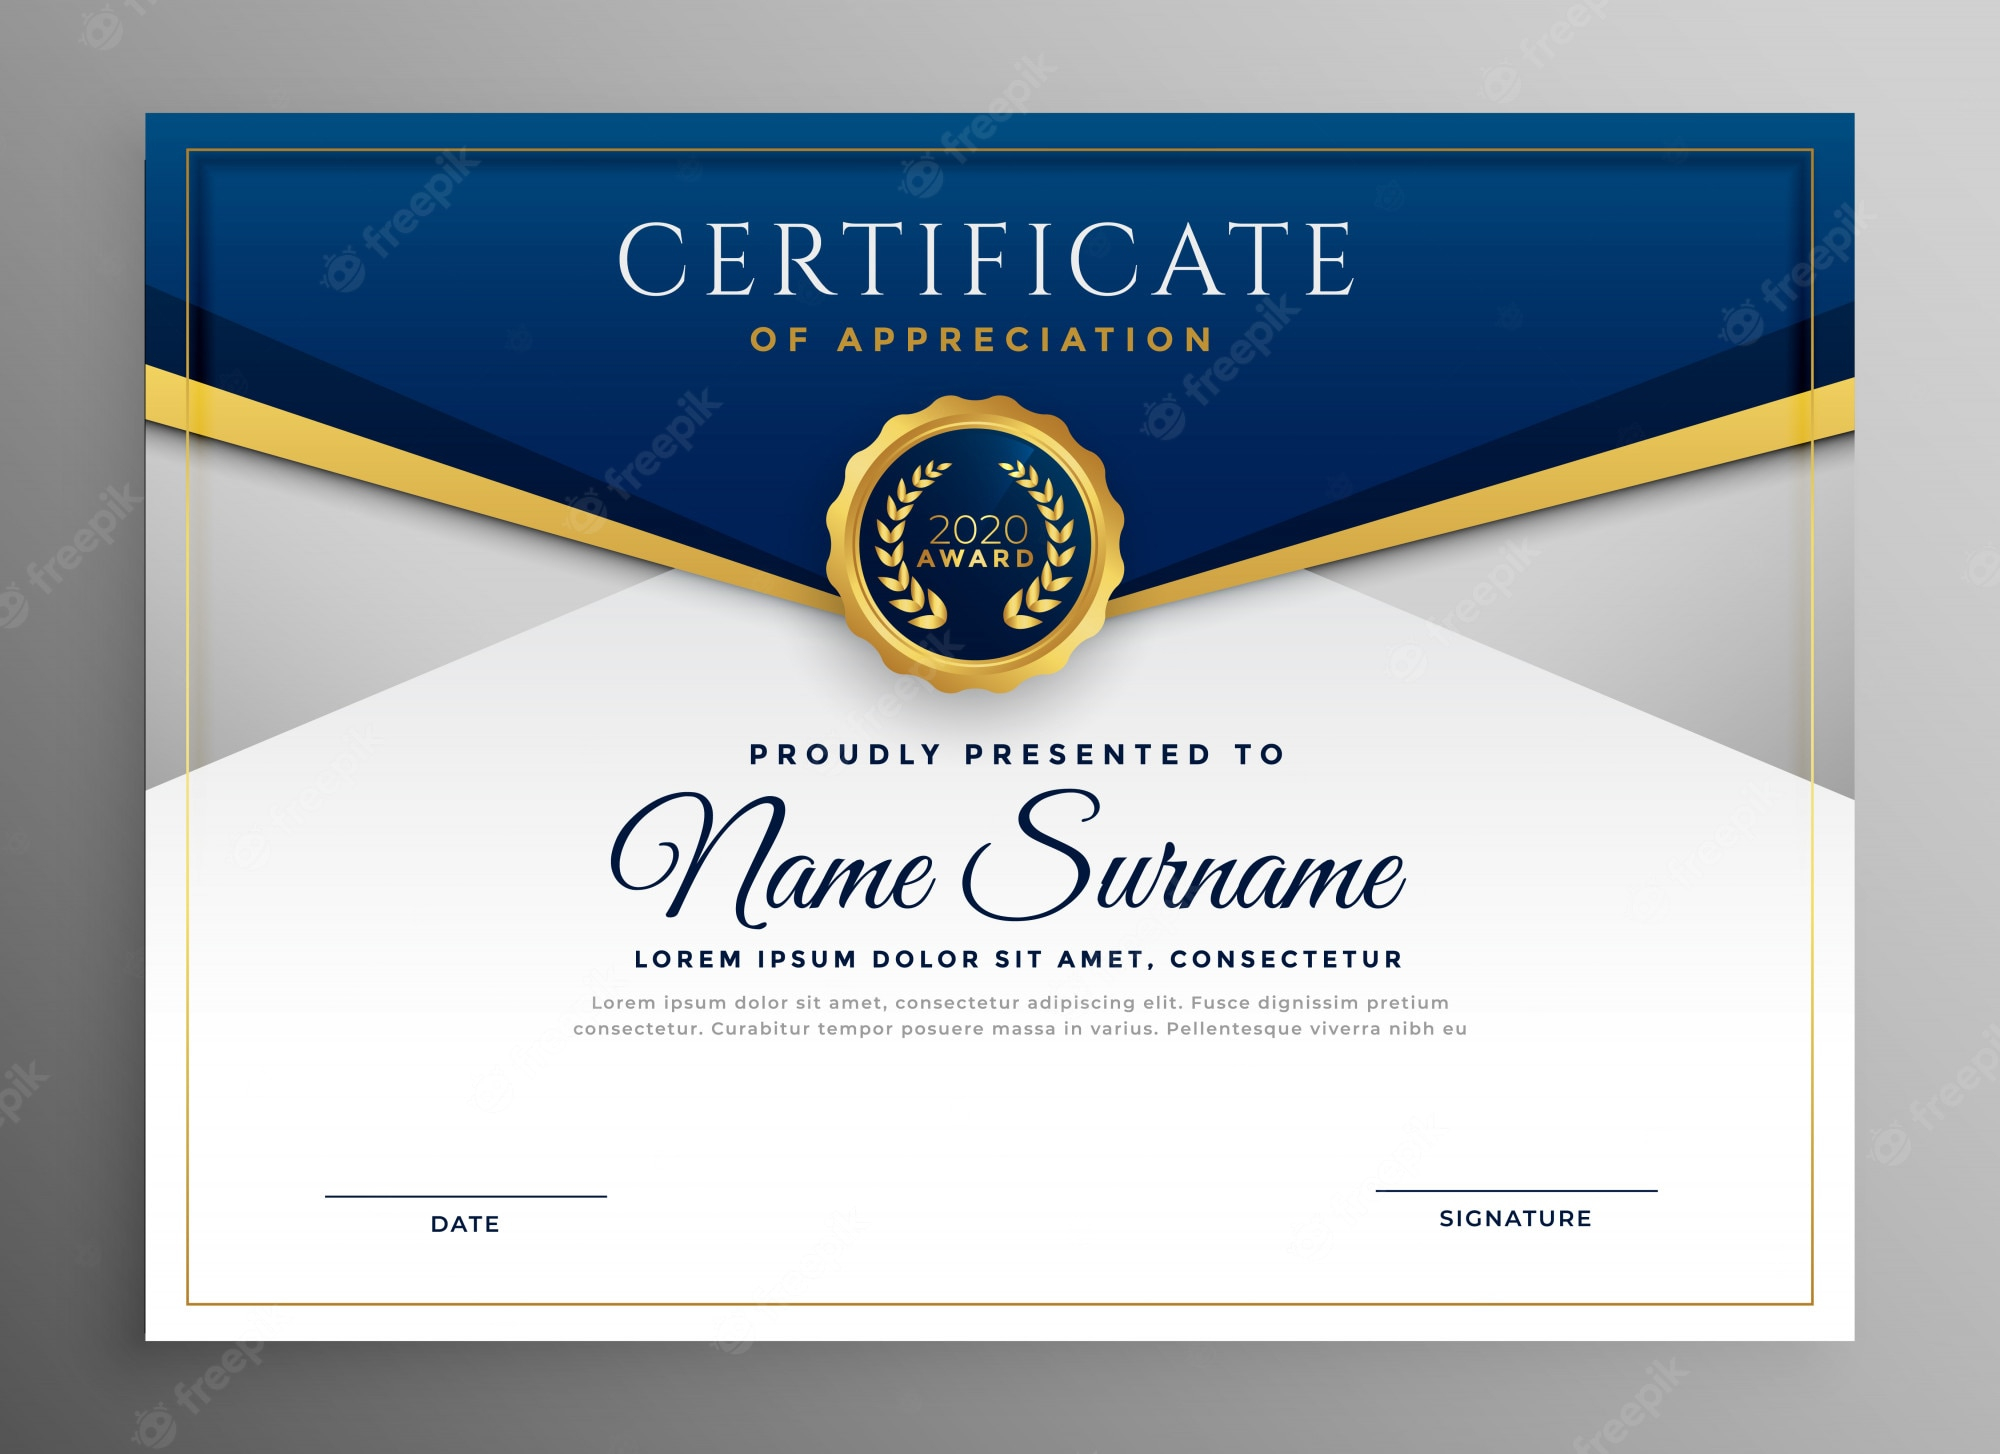 Certificate Images - Free Download on Freepik With Regard To High Resolution Certificate Template